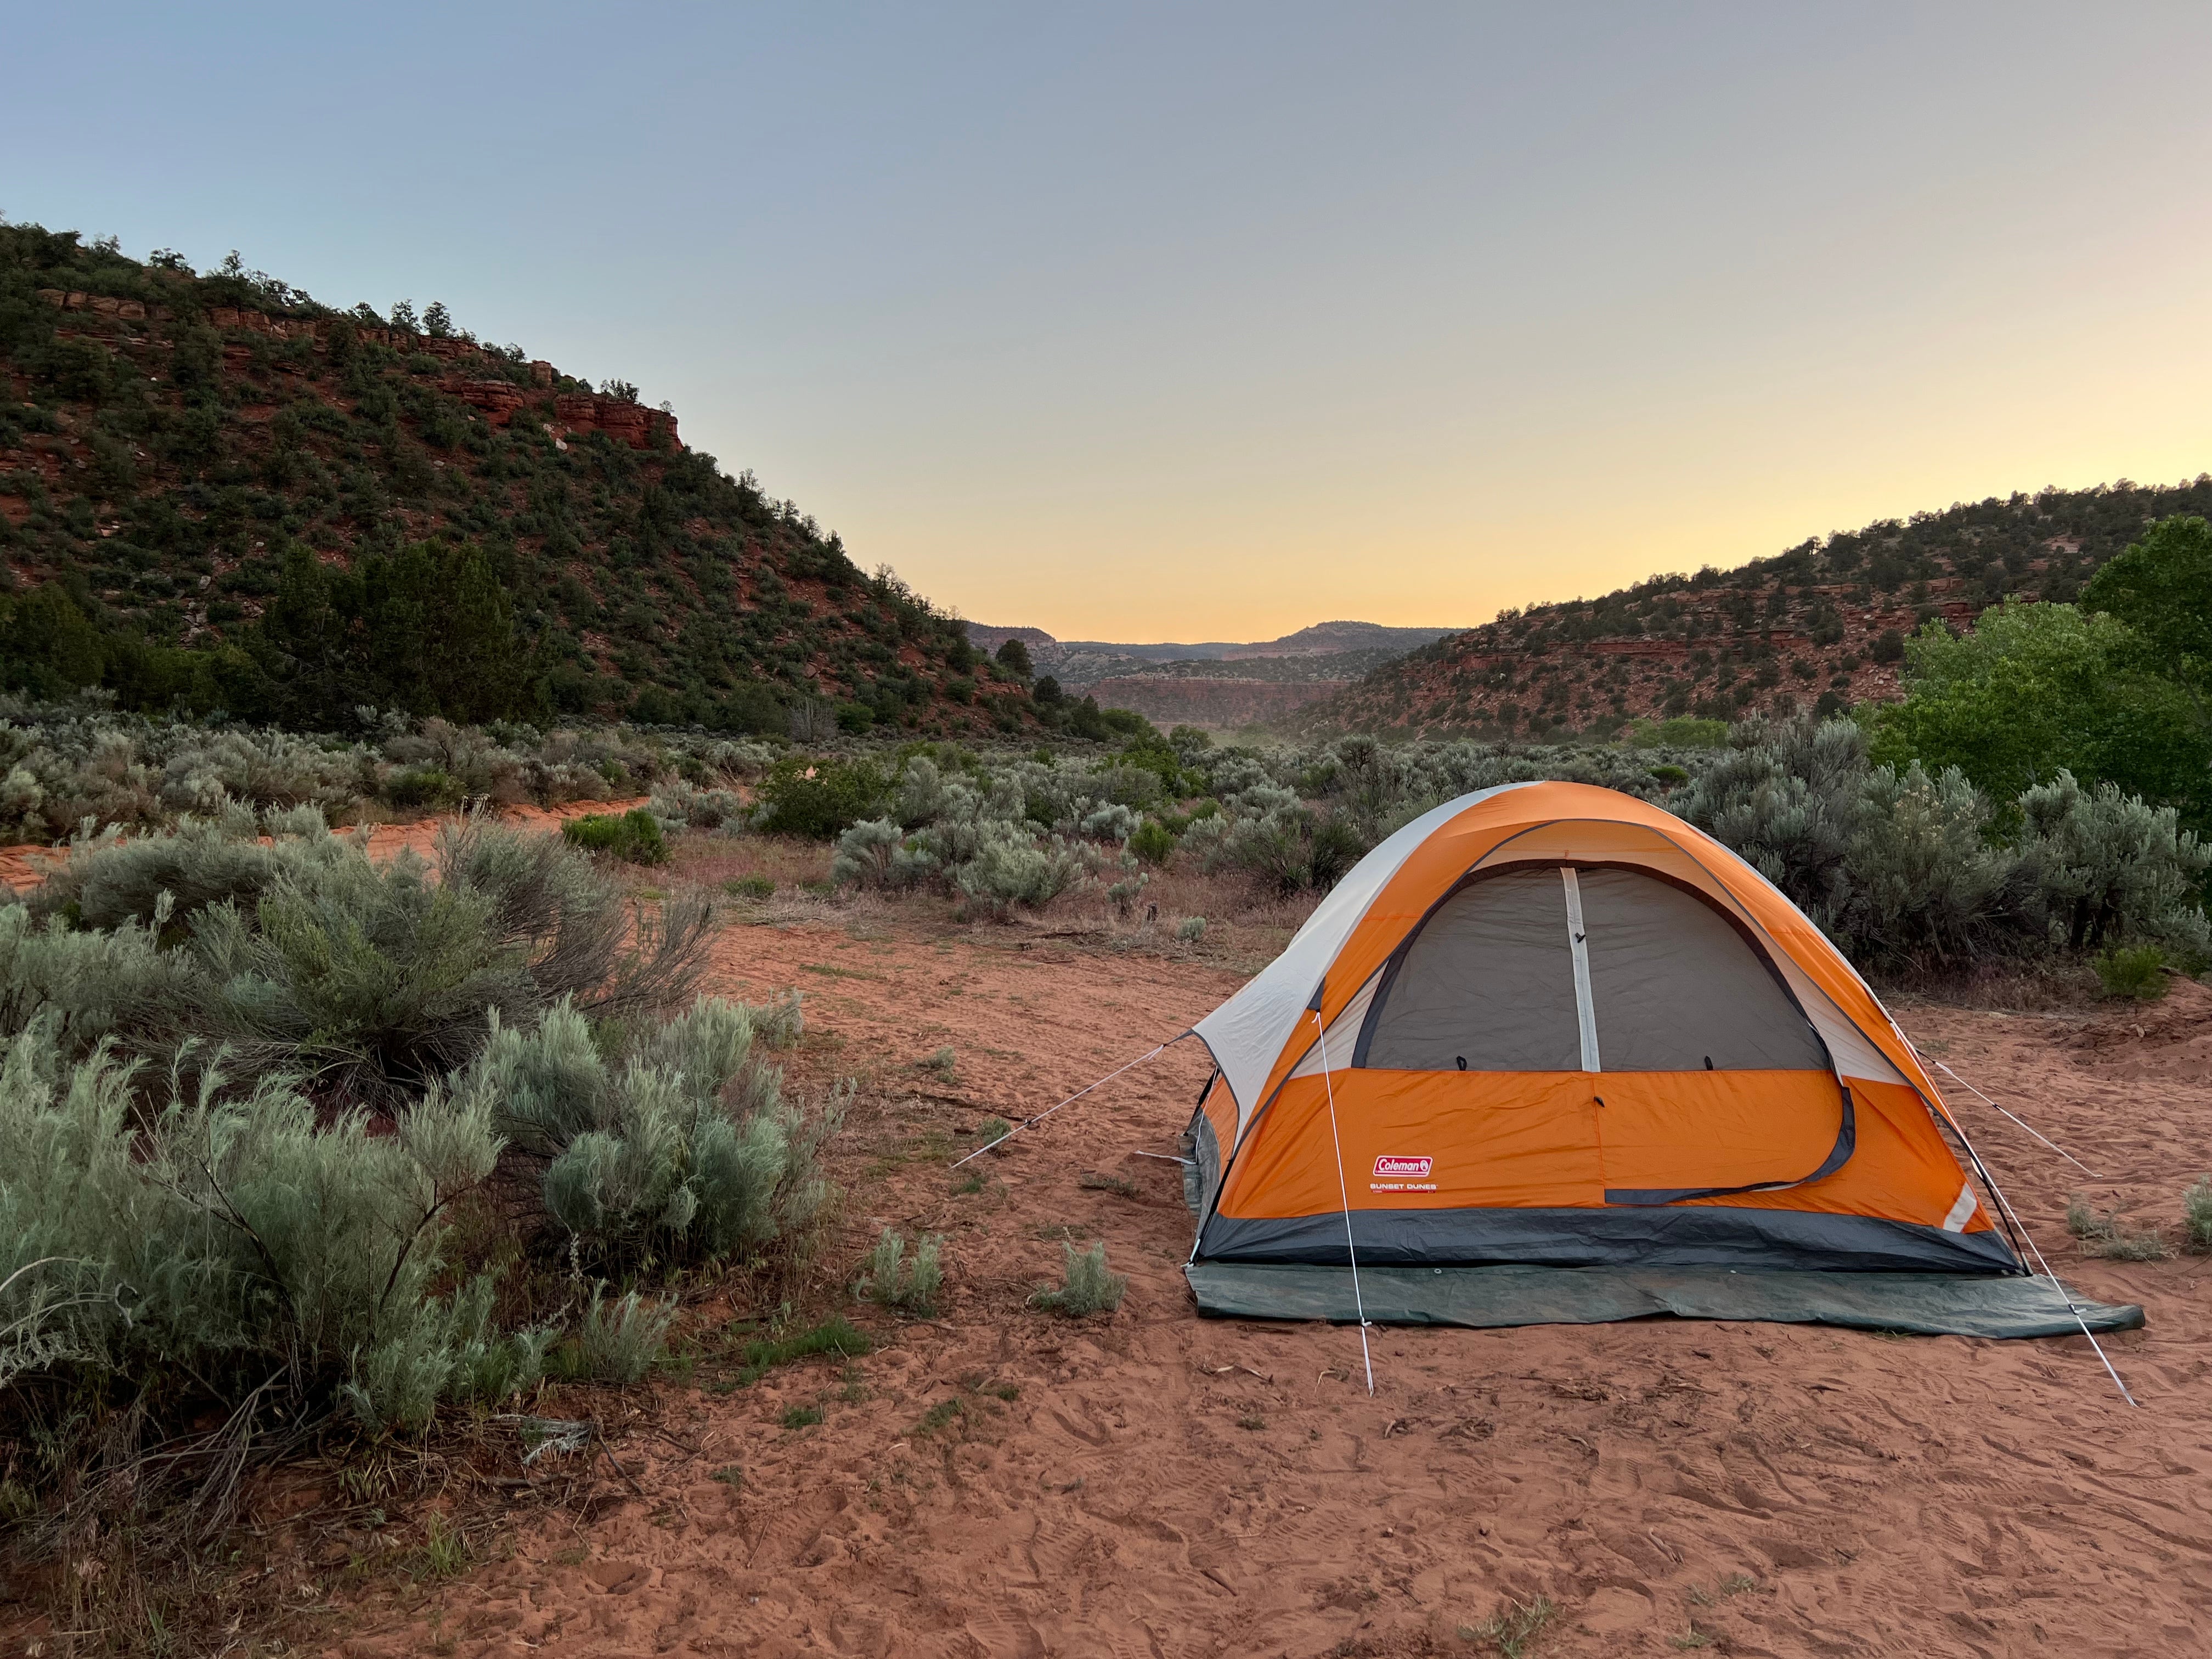 Camper submitted image from Hog Canyon - 5